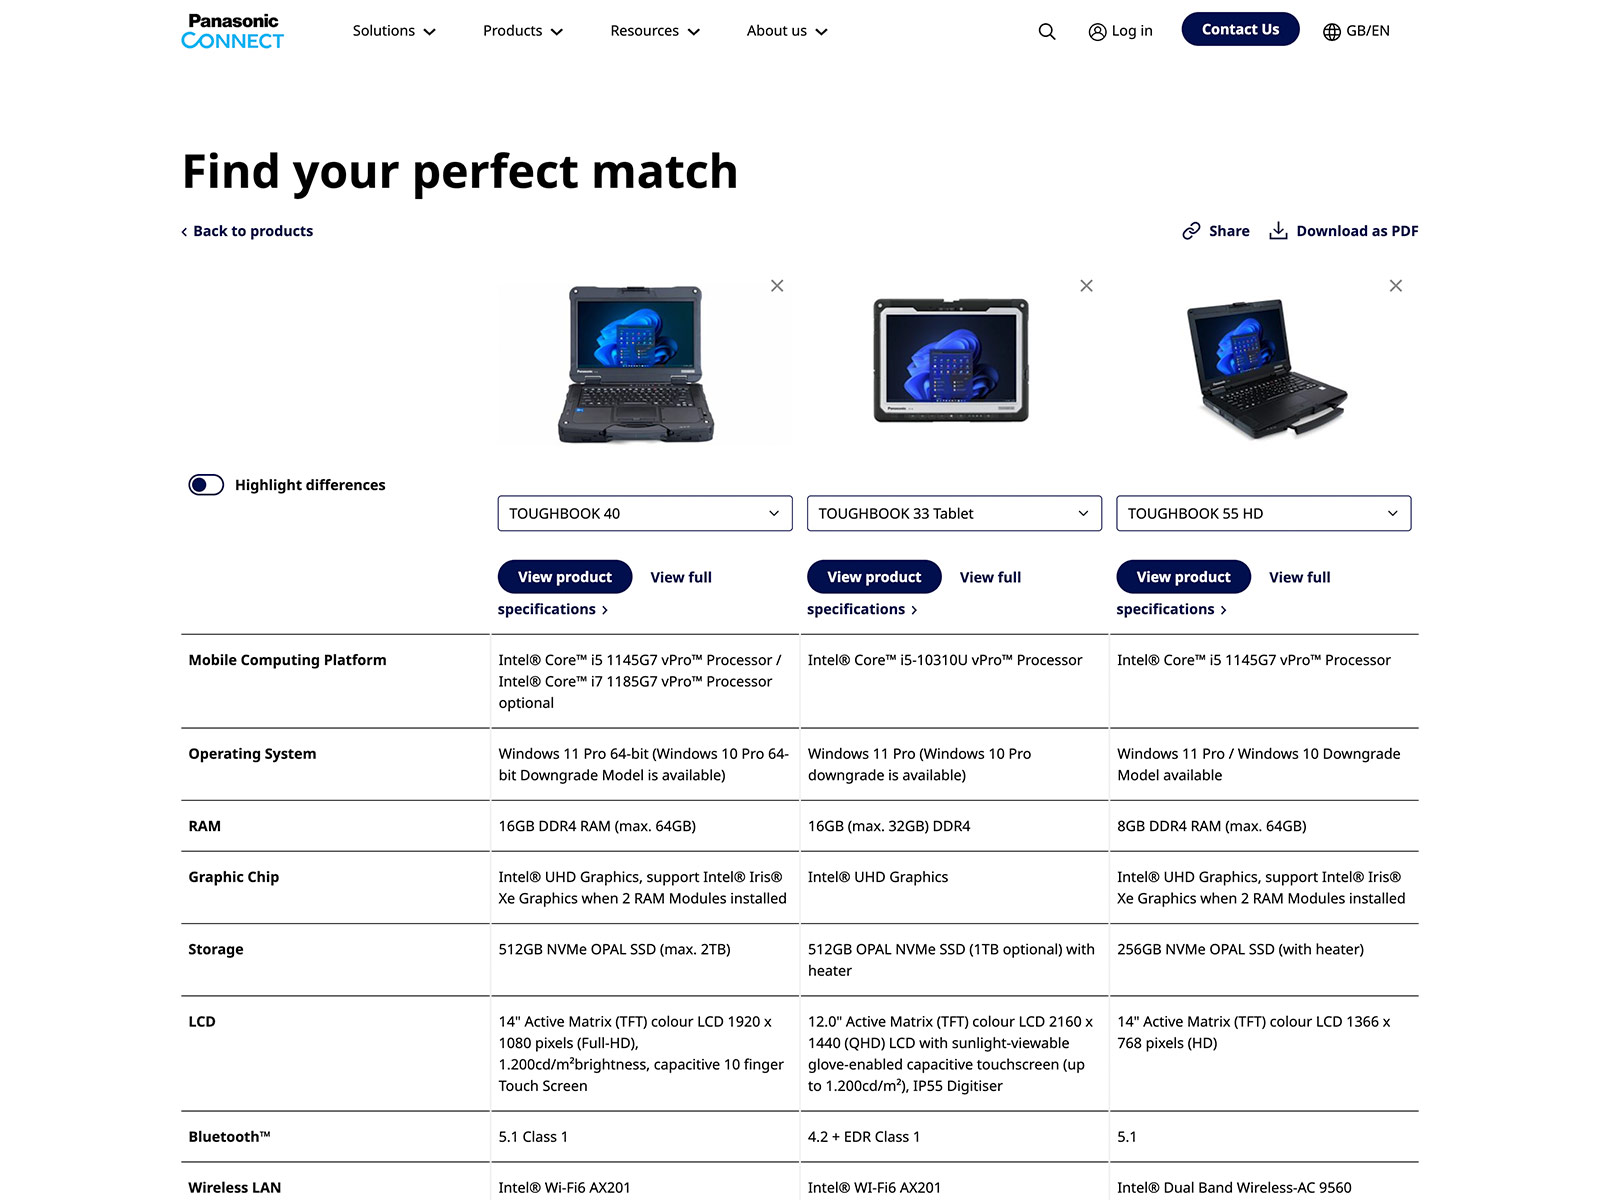 Product comparison tool